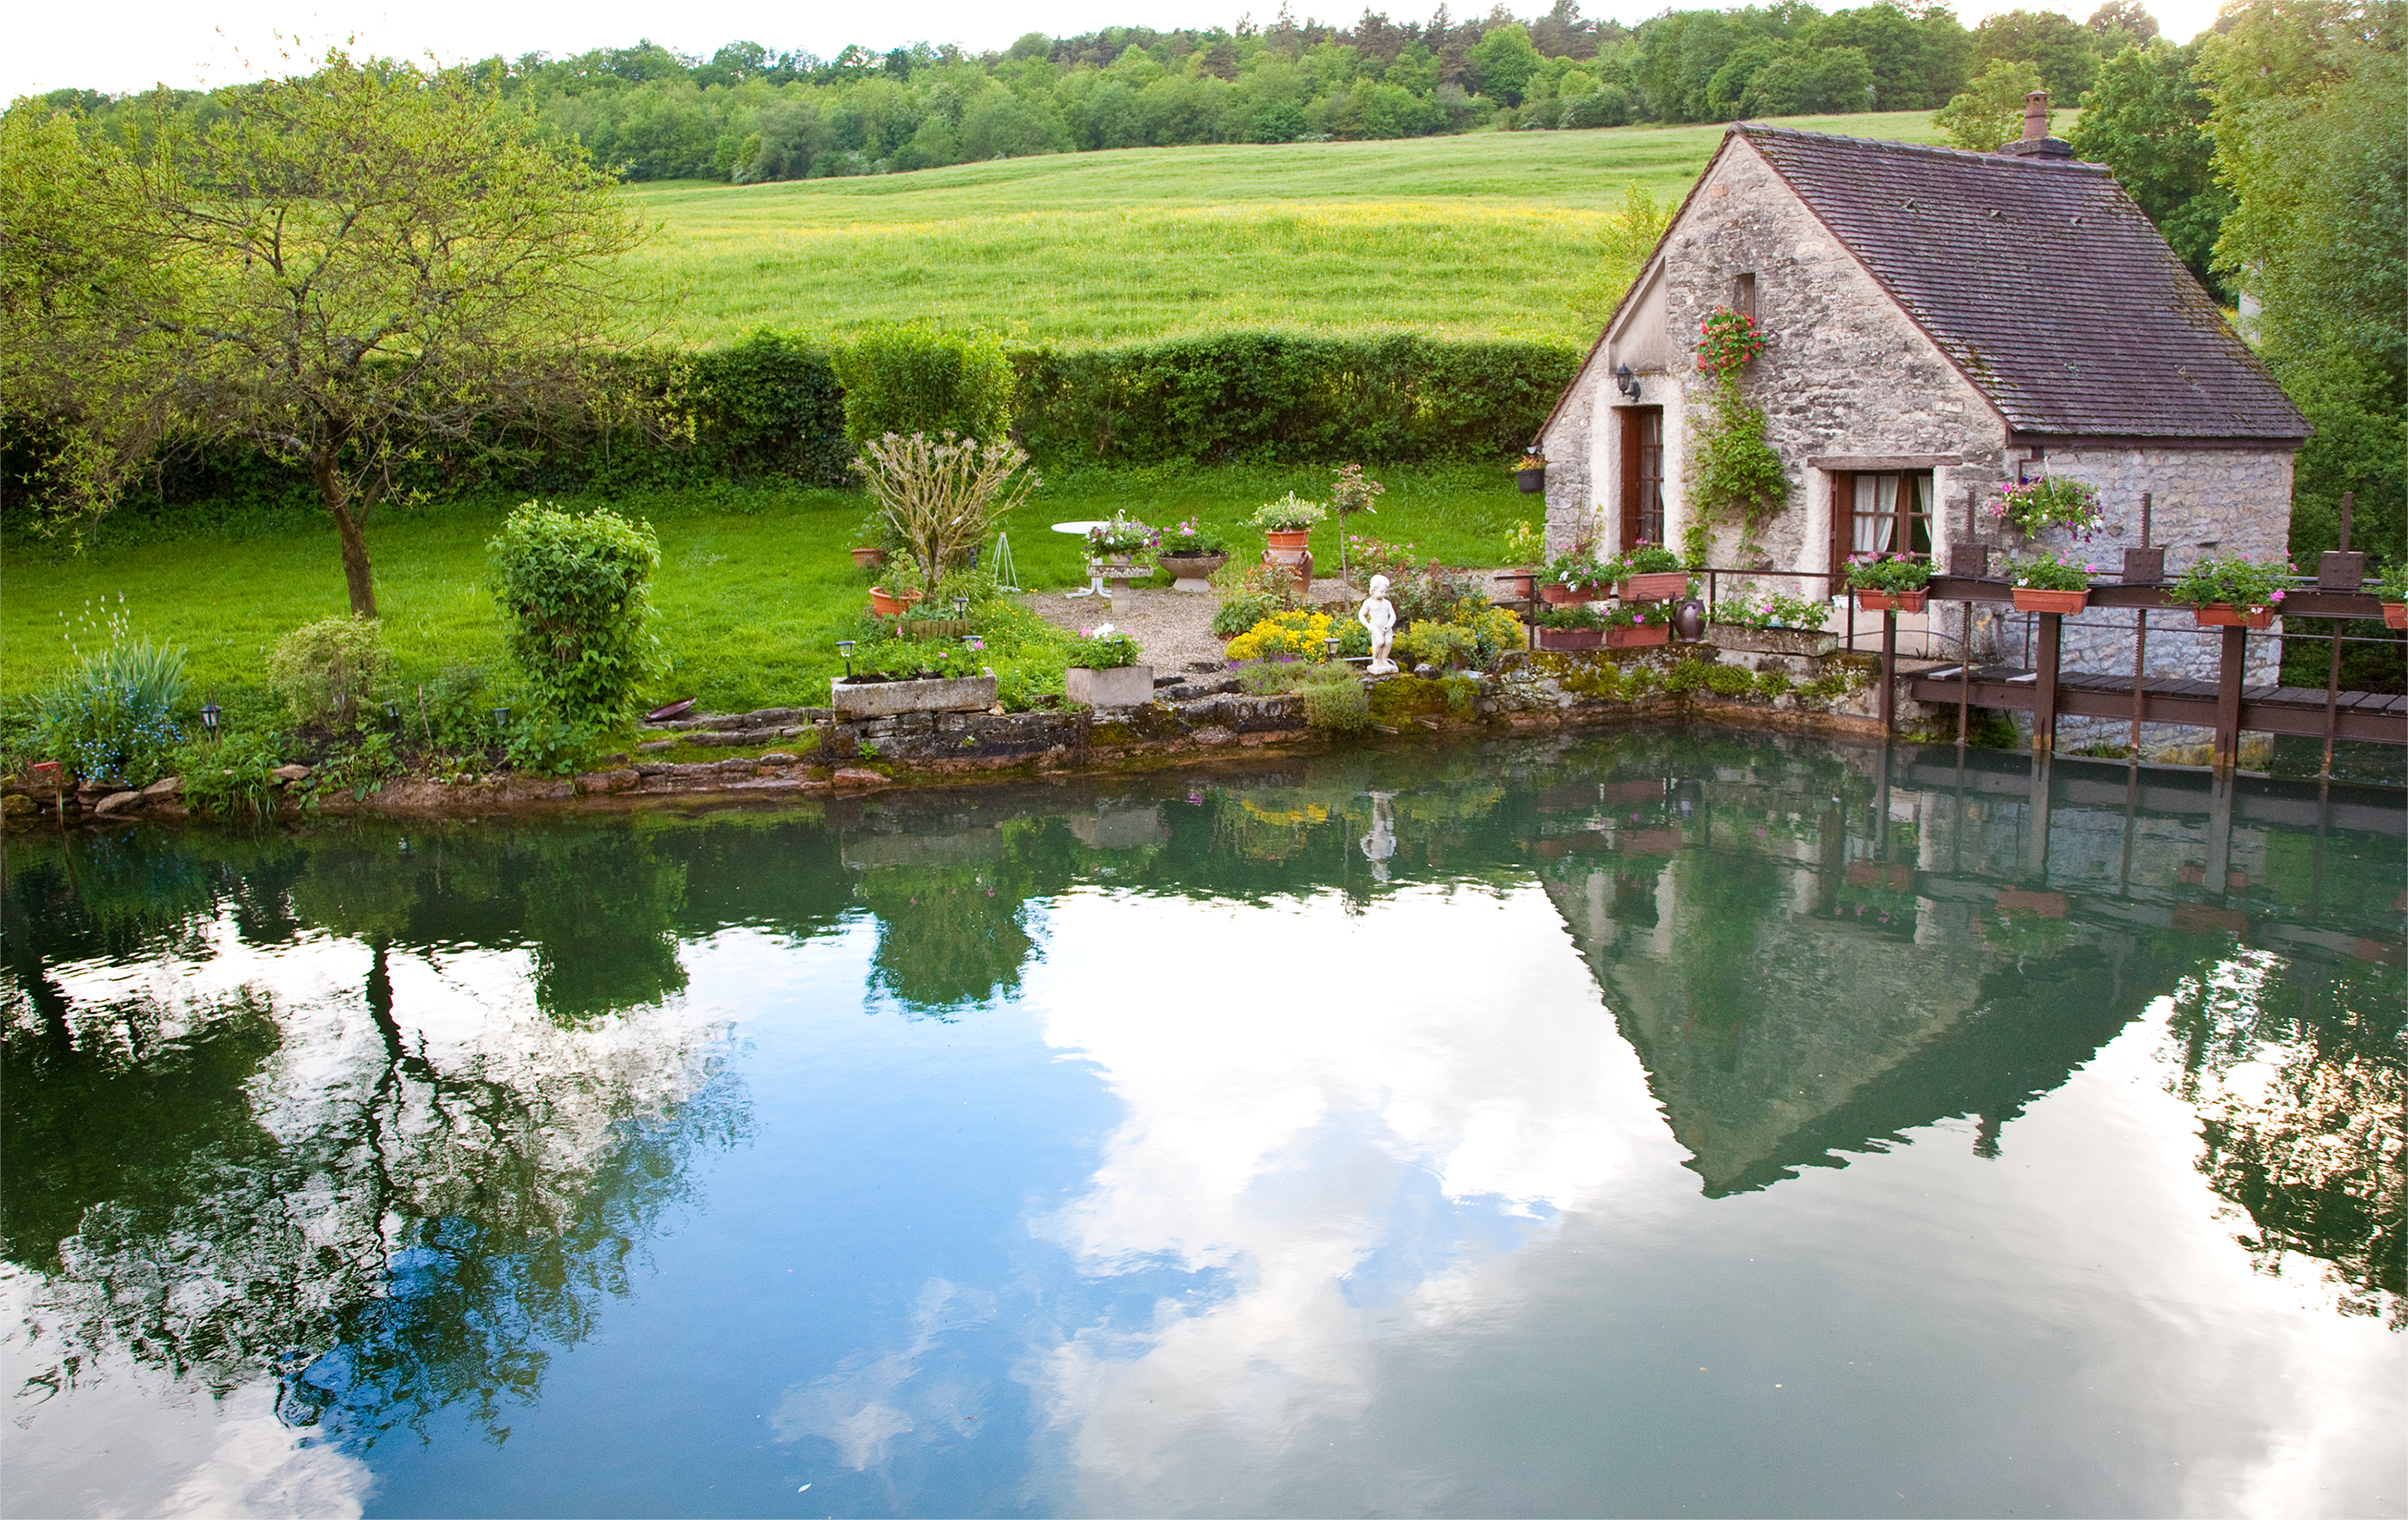 There are many holiday rentals that offer baby-friendly facilities, such as this cottage in Devon